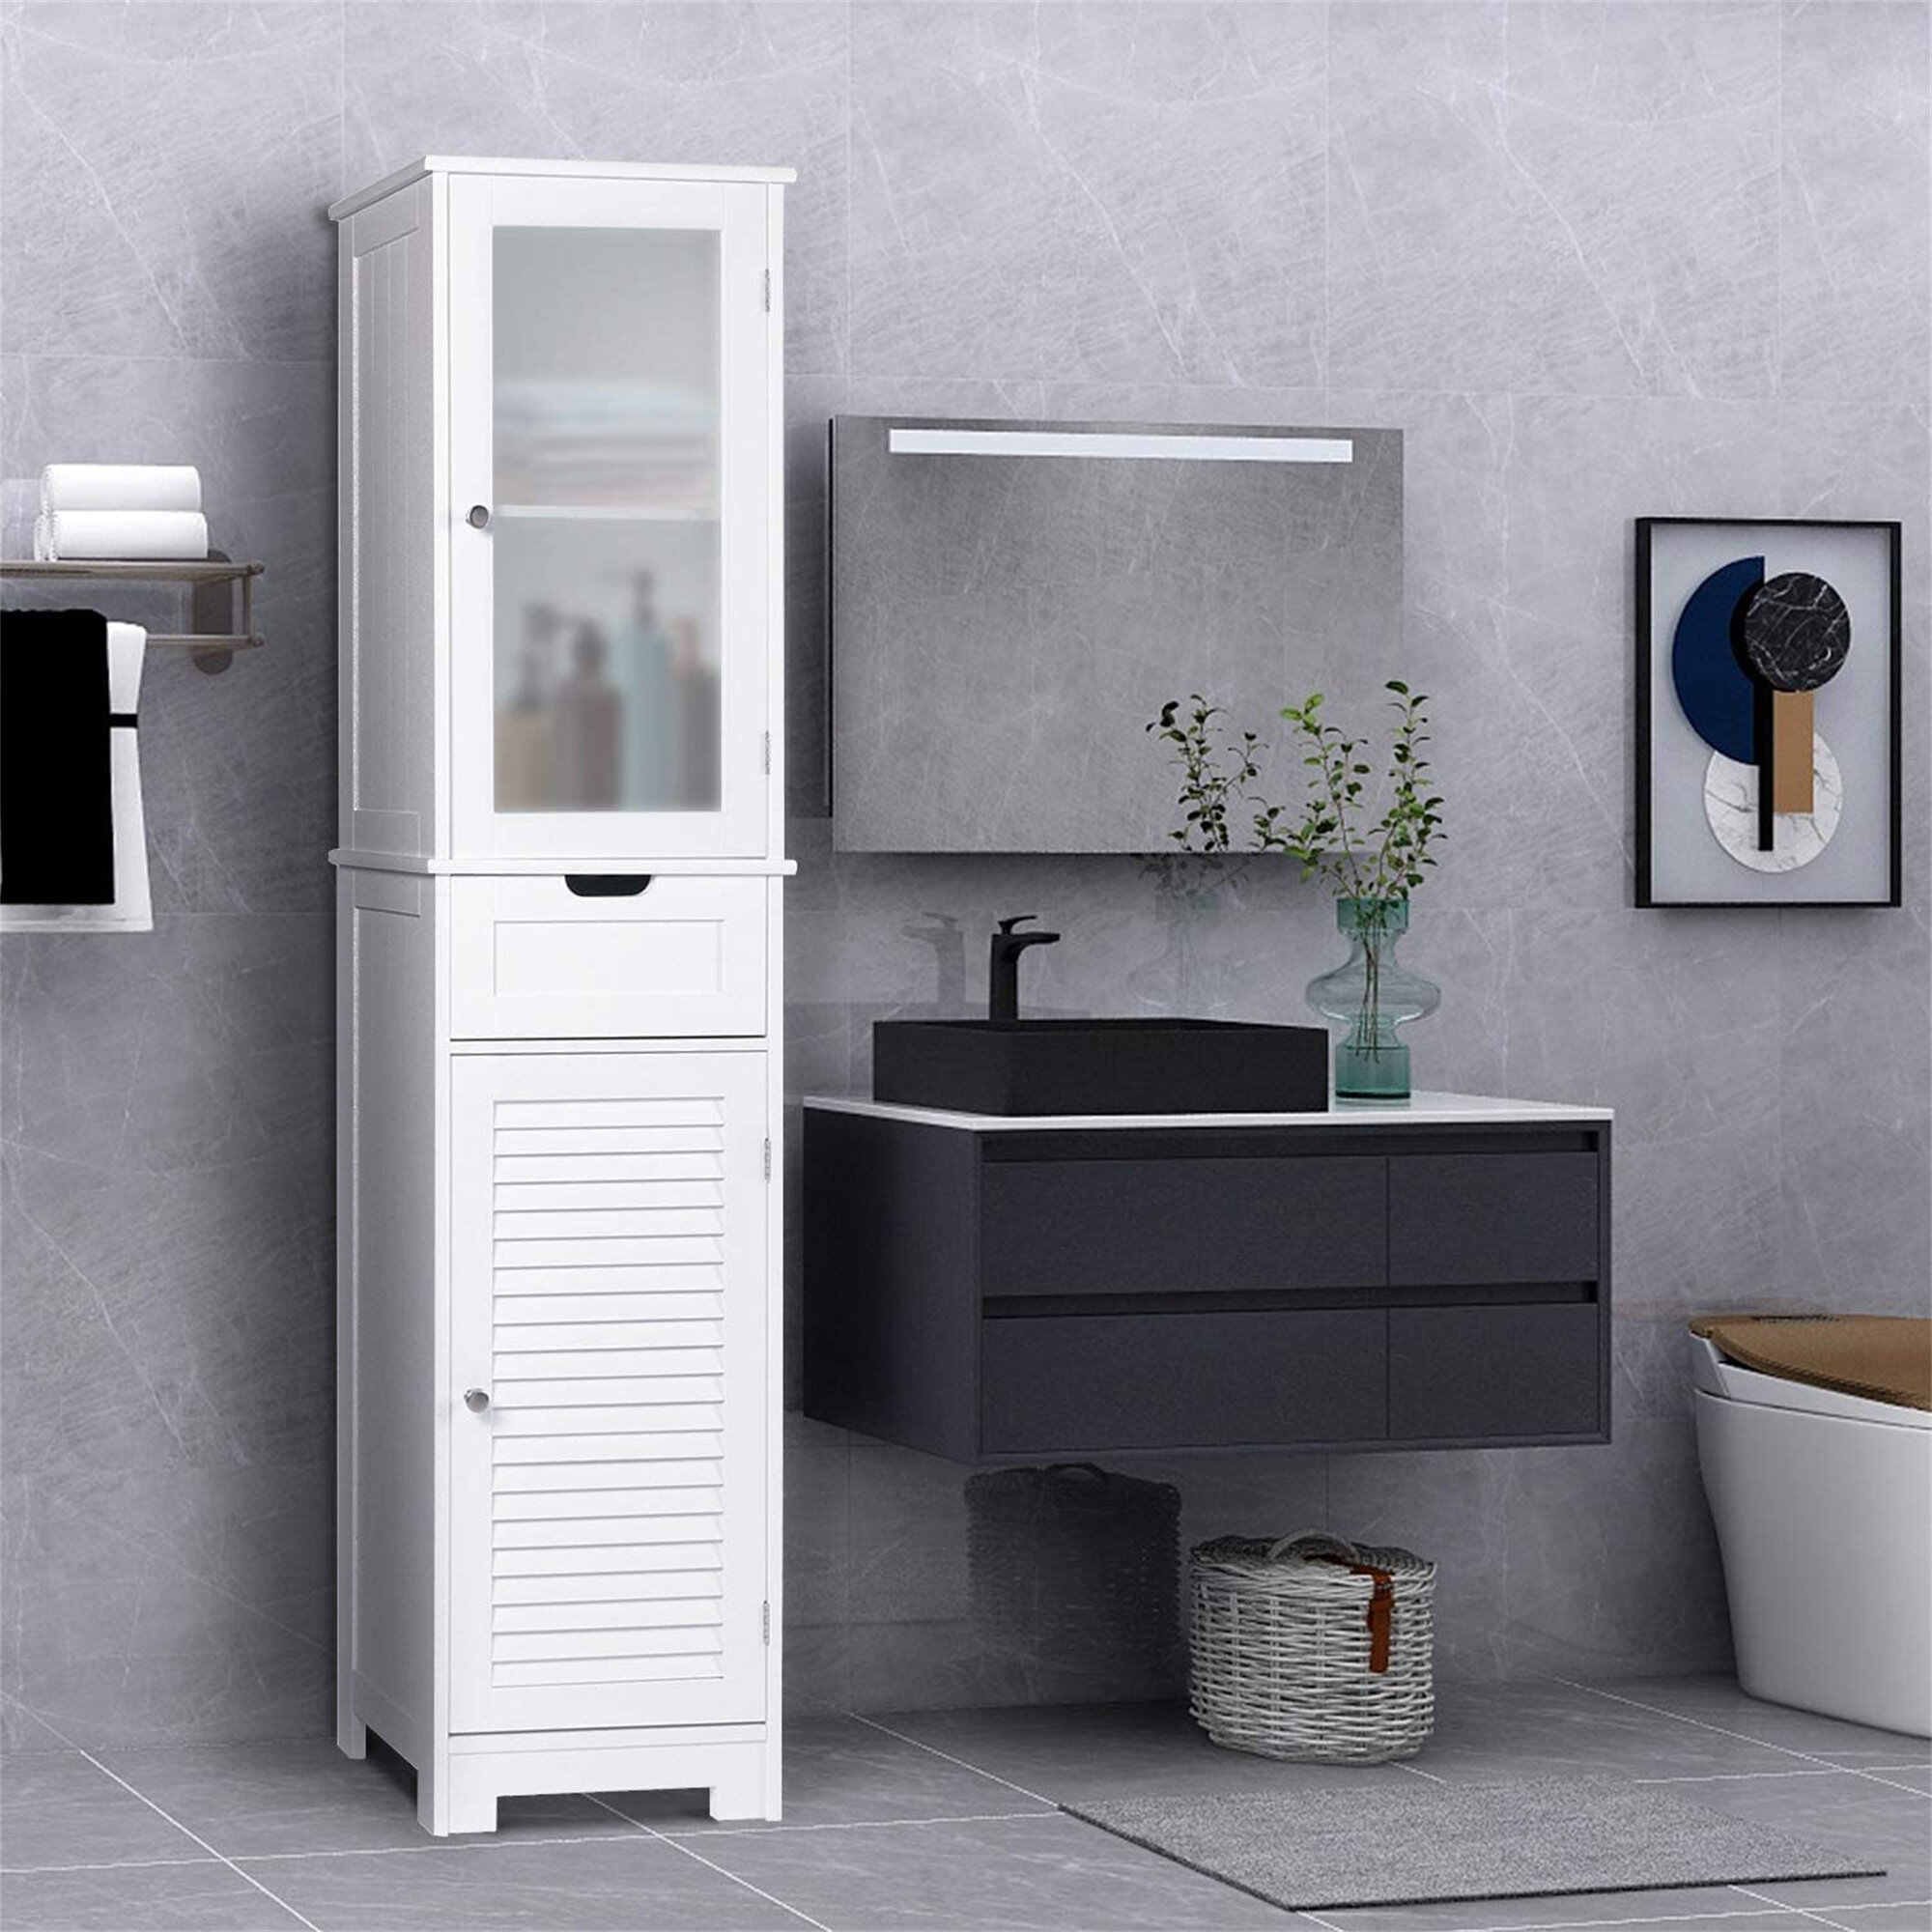 64.96 Tall Storage Cabinet, Floor Standing Cabinet with Shelves, Drawers  and Door, Thin Bathroom Cabinet Narrow Cabinet for Bathroom, Living Room  and